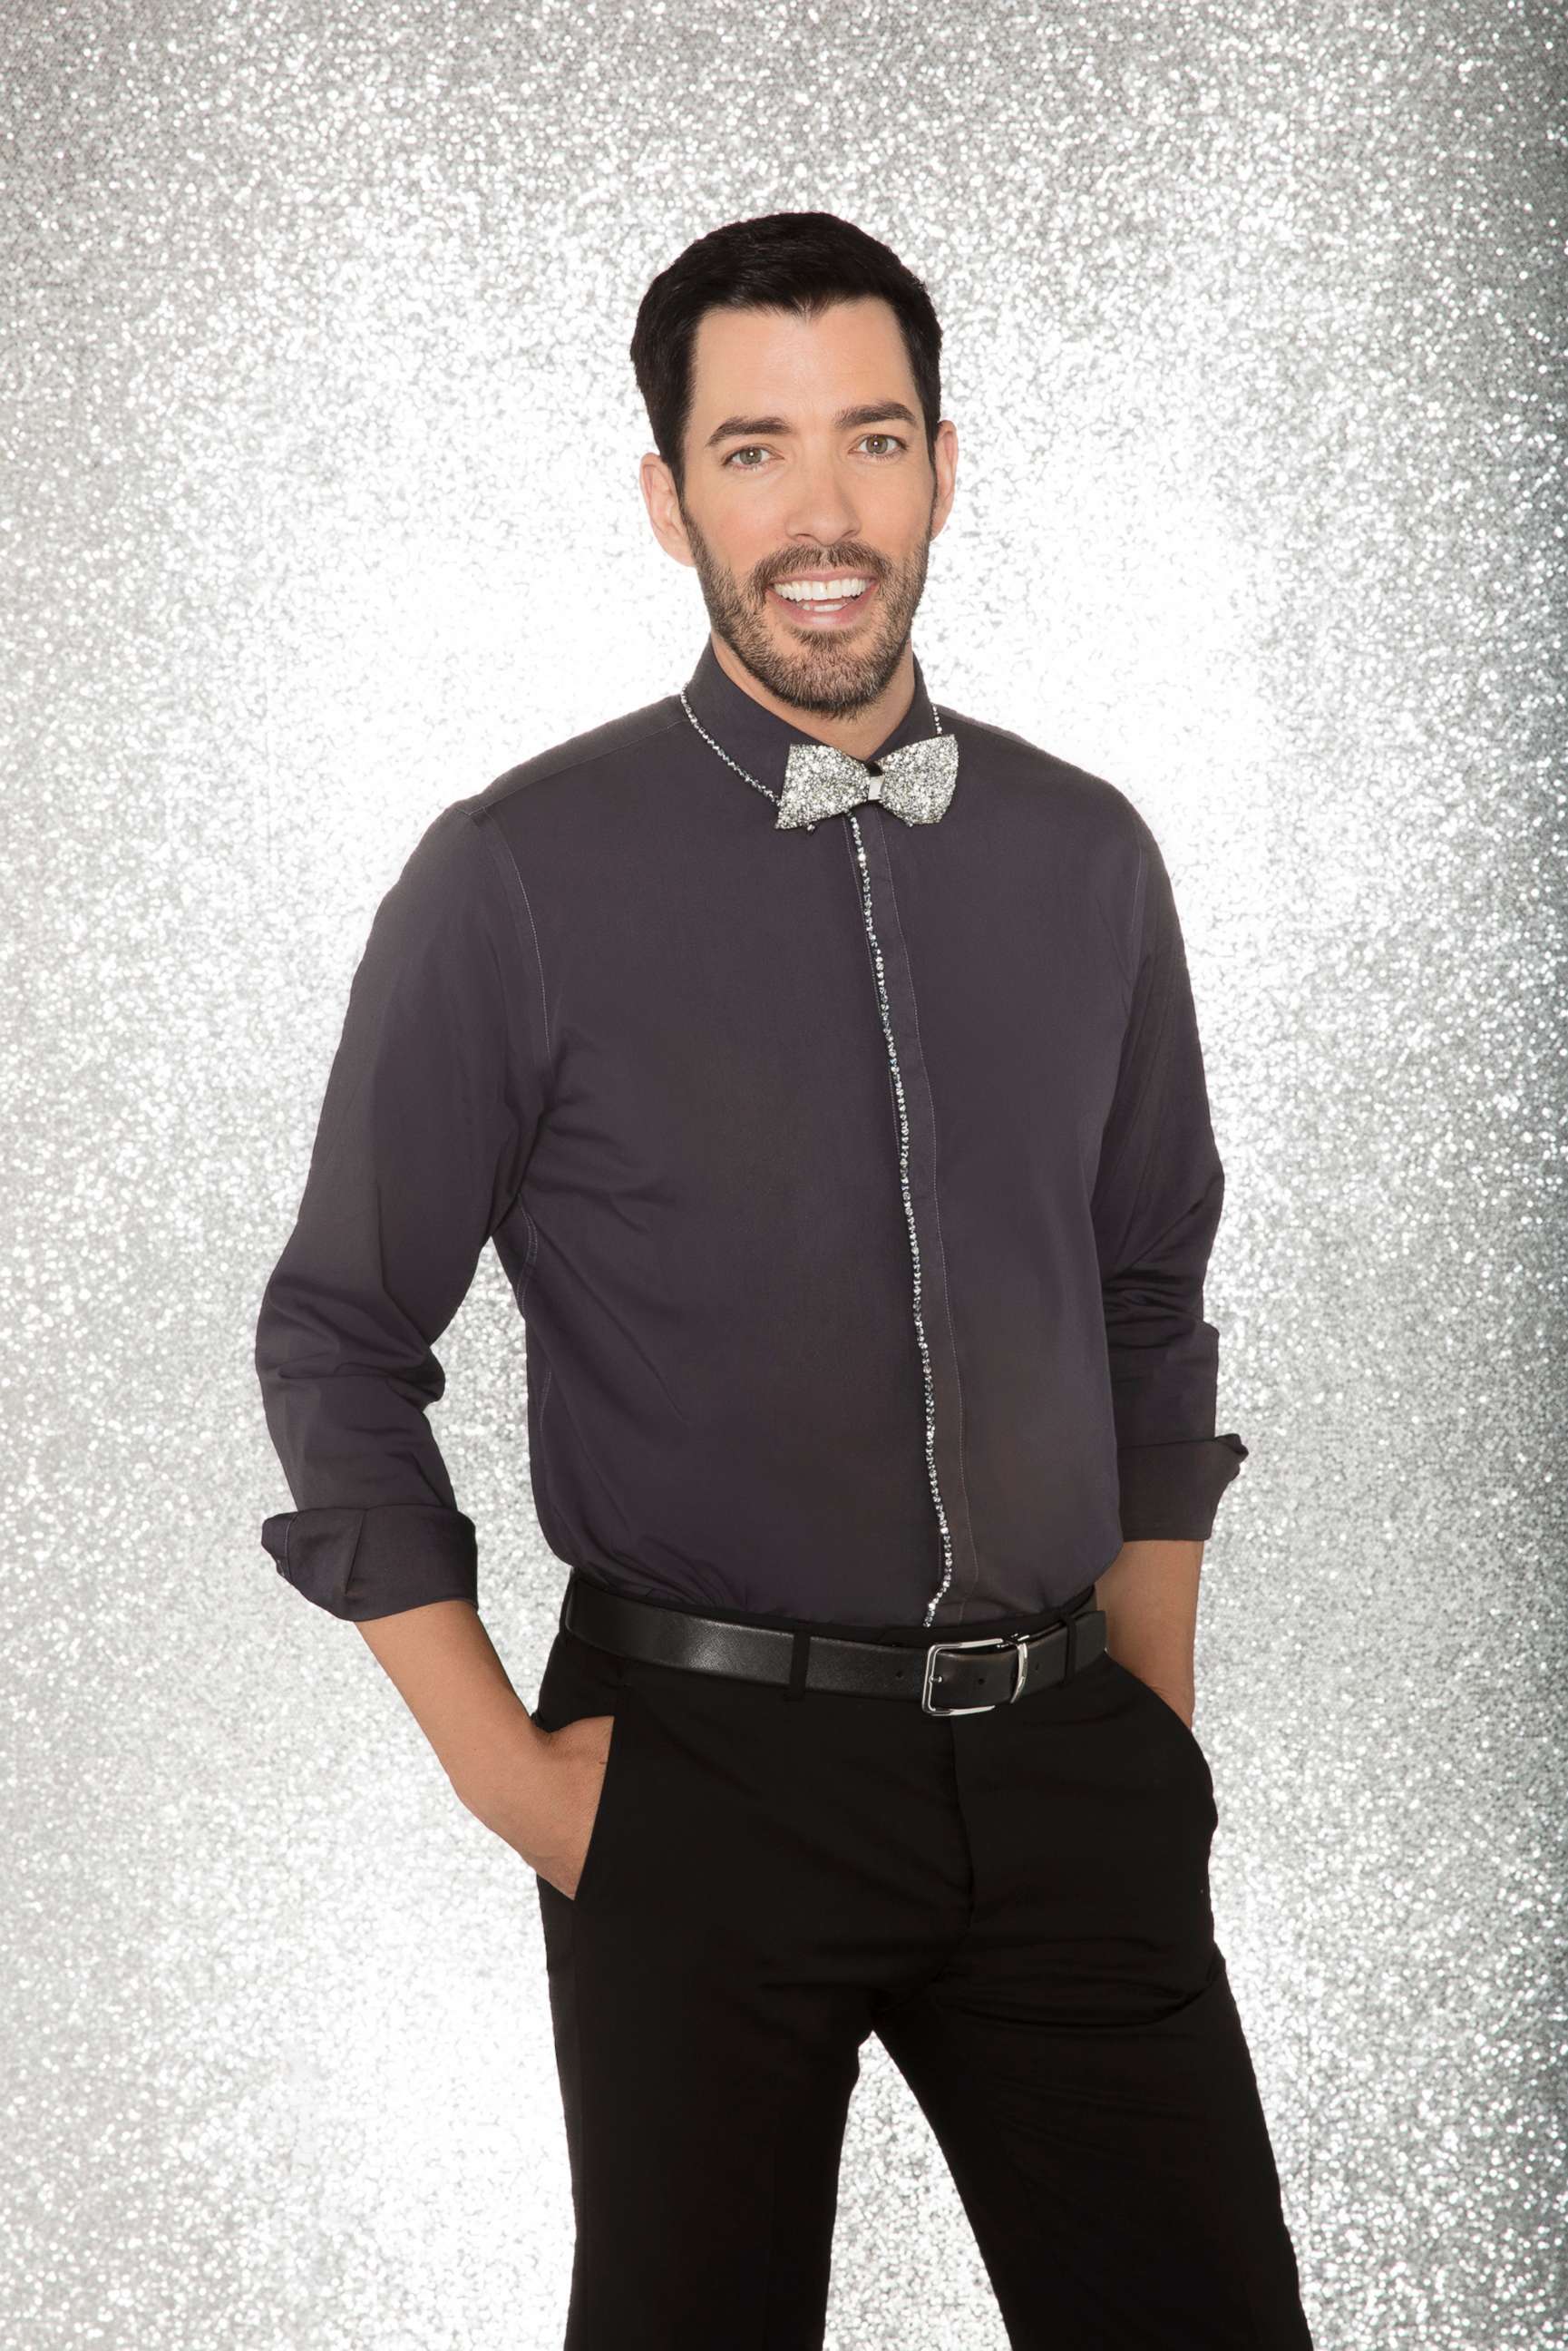 PHOTO: Drew Scott was announced as a celebrity cast member of "Dancing with the Stars" season 25.